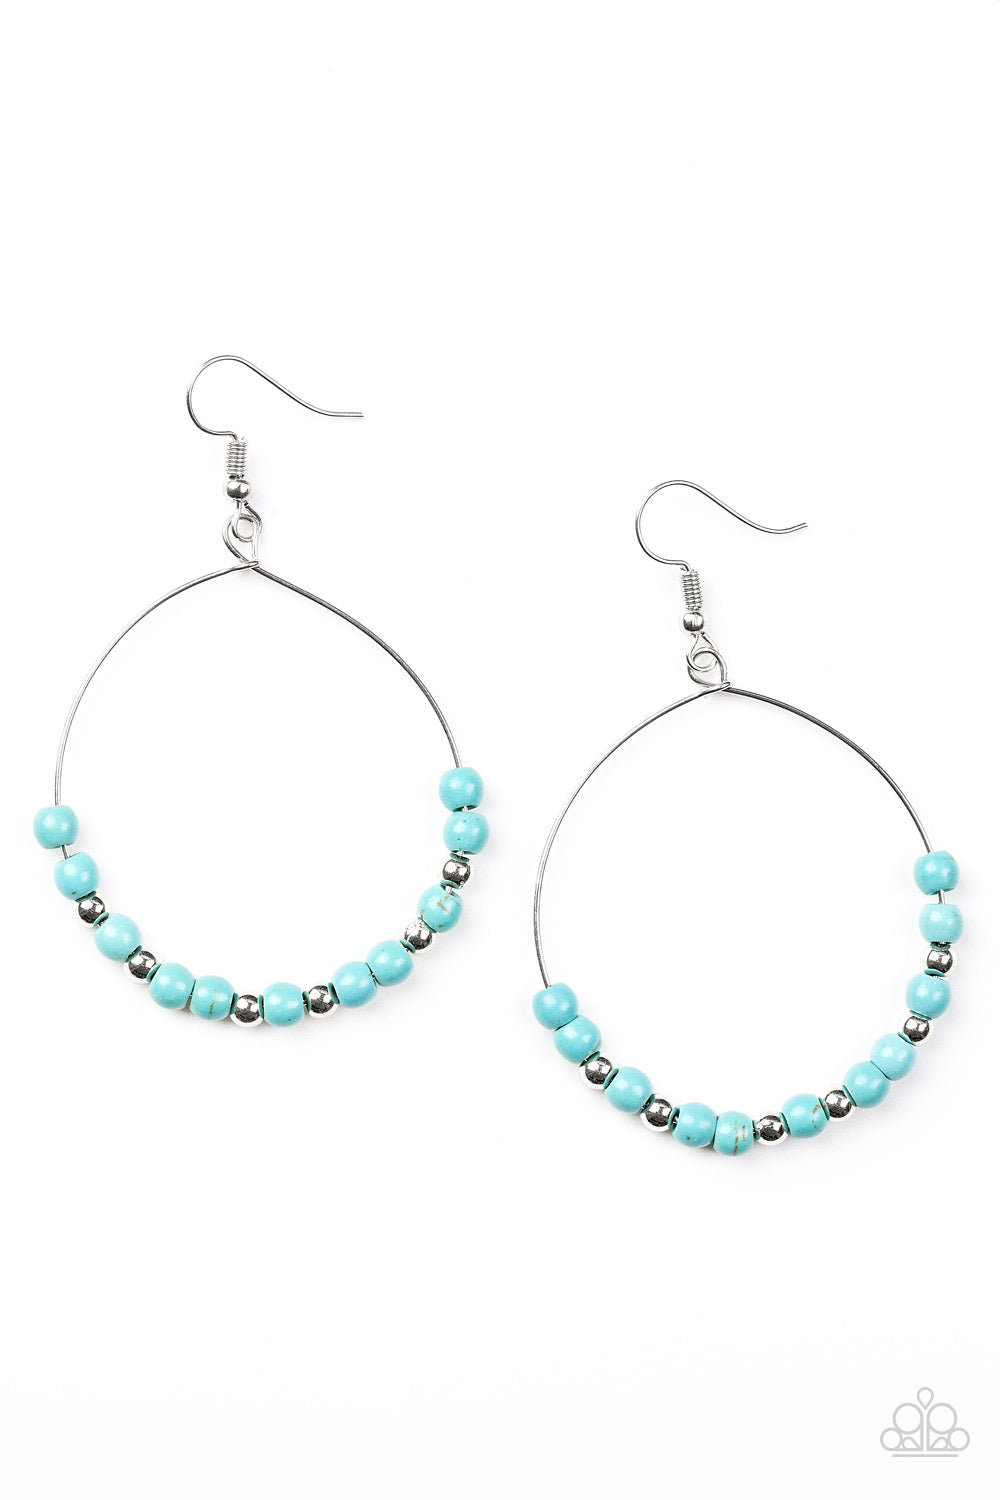 Stone Spa Earrings by Paparazzi Accessories